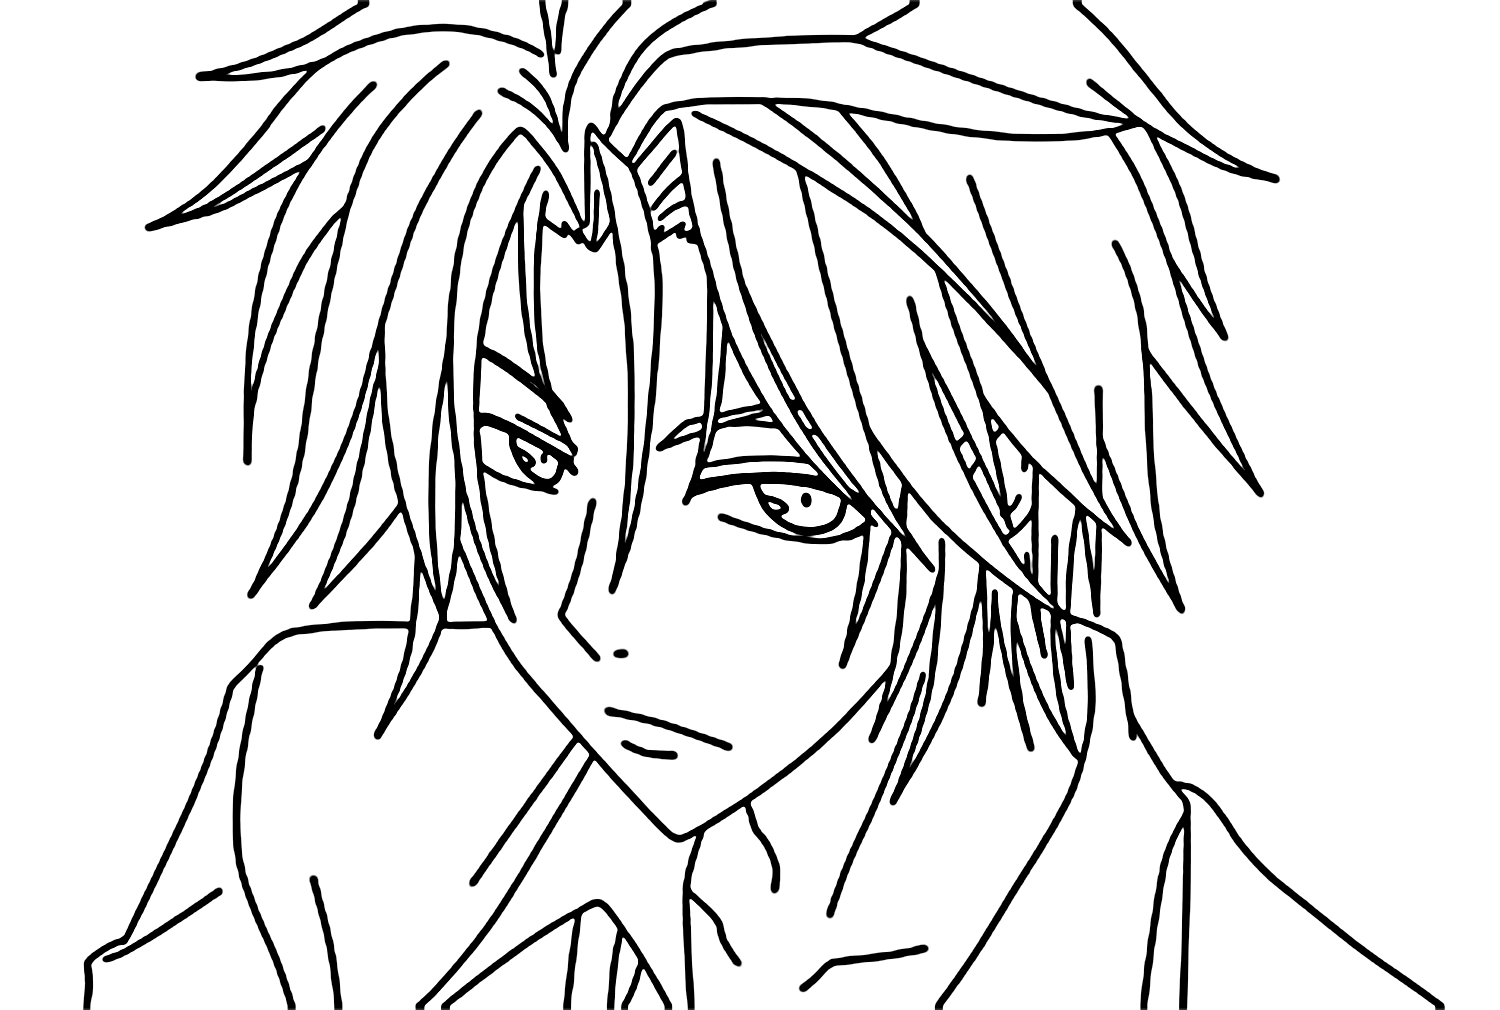 Takumi Usui Image to Color - Free Printable Coloring Pages